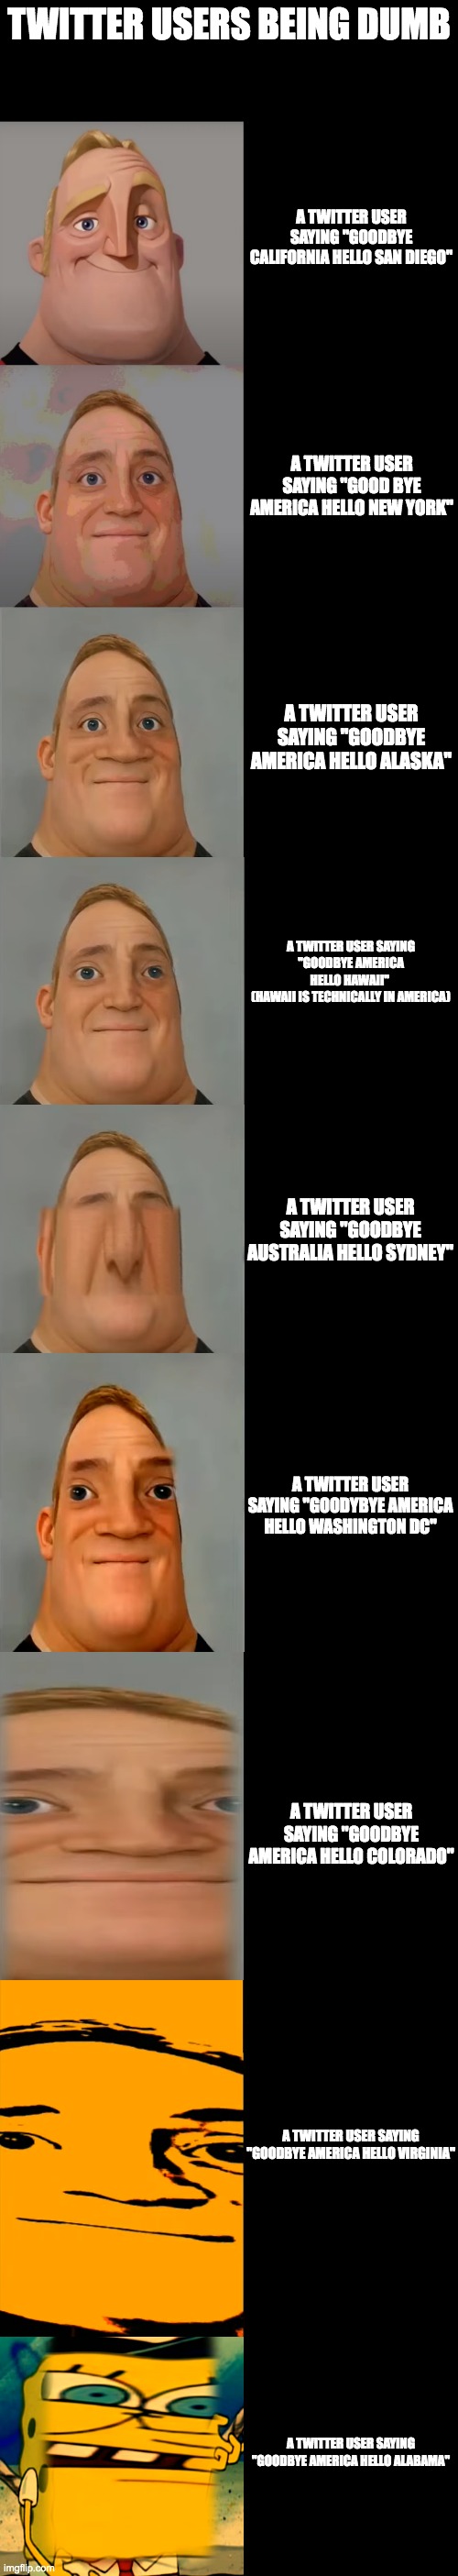 Mr Incredible becoming Idiot template | TWITTER USERS BEING DUMB; A TWITTER USER SAYING "GOODBYE CALIFORNIA HELLO SAN DIEGO"; A TWITTER USER SAYING "GOOD BYE AMERICA HELLO NEW YORK"; A TWITTER USER SAYING "GOODBYE AMERICA HELLO ALASKA"; A TWITTER USER SAYING "GOODBYE AMERICA HELLO HAWAII" 
(HAWAII IS TECHNICALLY IN AMERICA); A TWITTER USER SAYING "GOODBYE AUSTRALIA HELLO SYDNEY"; A TWITTER USER SAYING "GOODYBYE AMERICA HELLO WASHINGTON DC"; A TWITTER USER SAYING "GOODBYE AMERICA HELLO COLORADO"; A TWITTER USER SAYING "GOODBYE AMERICA HELLO VIRGINIA"; A TWITTER USER SAYING "GOODBYE AMERICA HELLO ALABAMA" | image tagged in mr incredible becoming idiot template | made w/ Imgflip meme maker